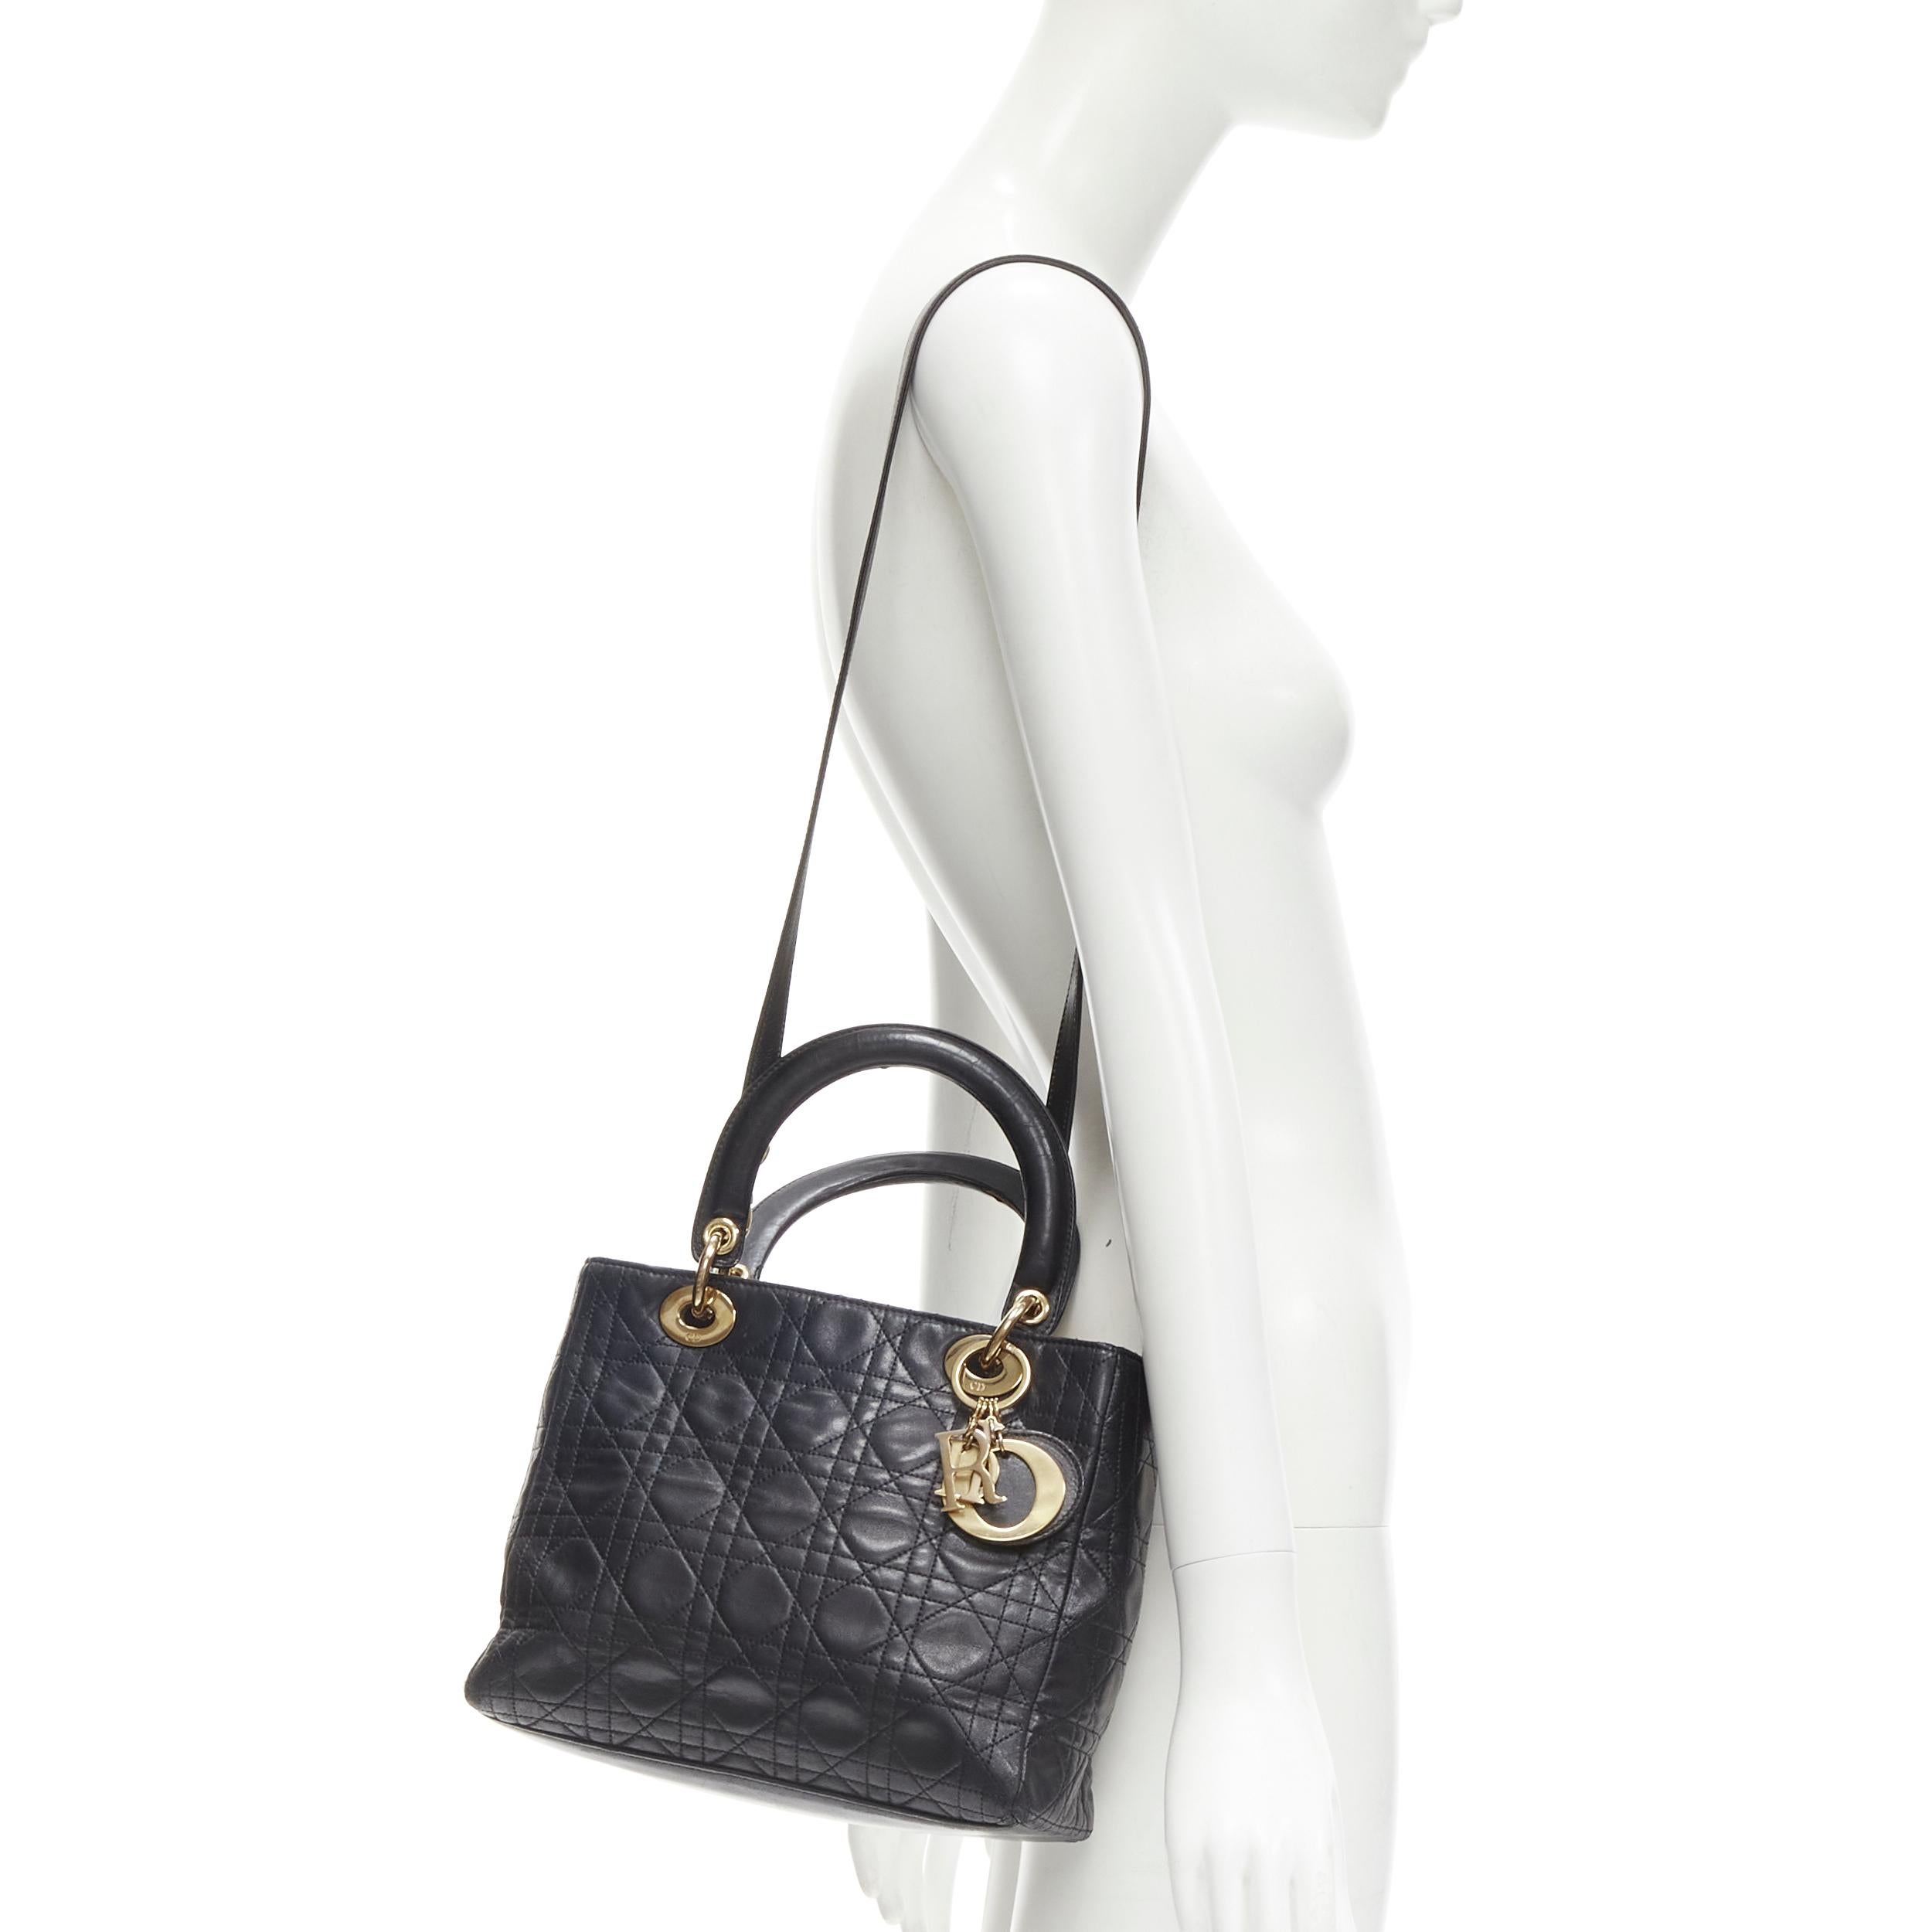 CHRISTIAN DIOR Vintage Lady Dior black cannage gold charm crossbody satchel bag
Brand: Christian Dior
Model: Lady Dior
Material: Leather
Color: Black
Pattern: Solid
Closure: Zip
Extra Detail: Gold-tone hardware. DIOR Charm on handle. Detachable